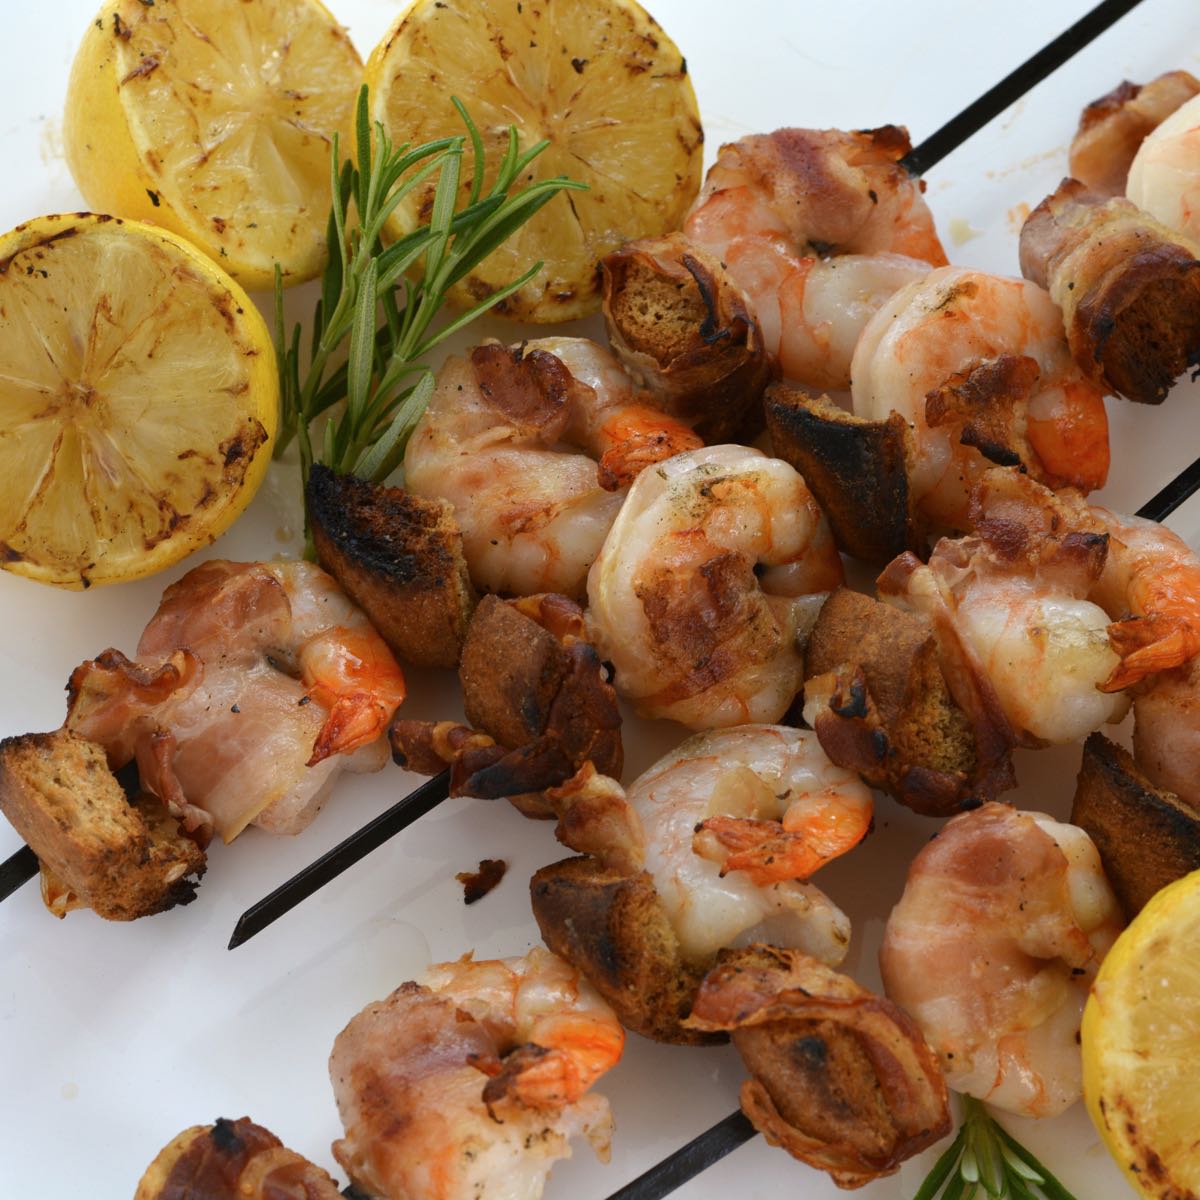 Skewers of Shrimp on the Barbie with pancetta and grilled lemons.